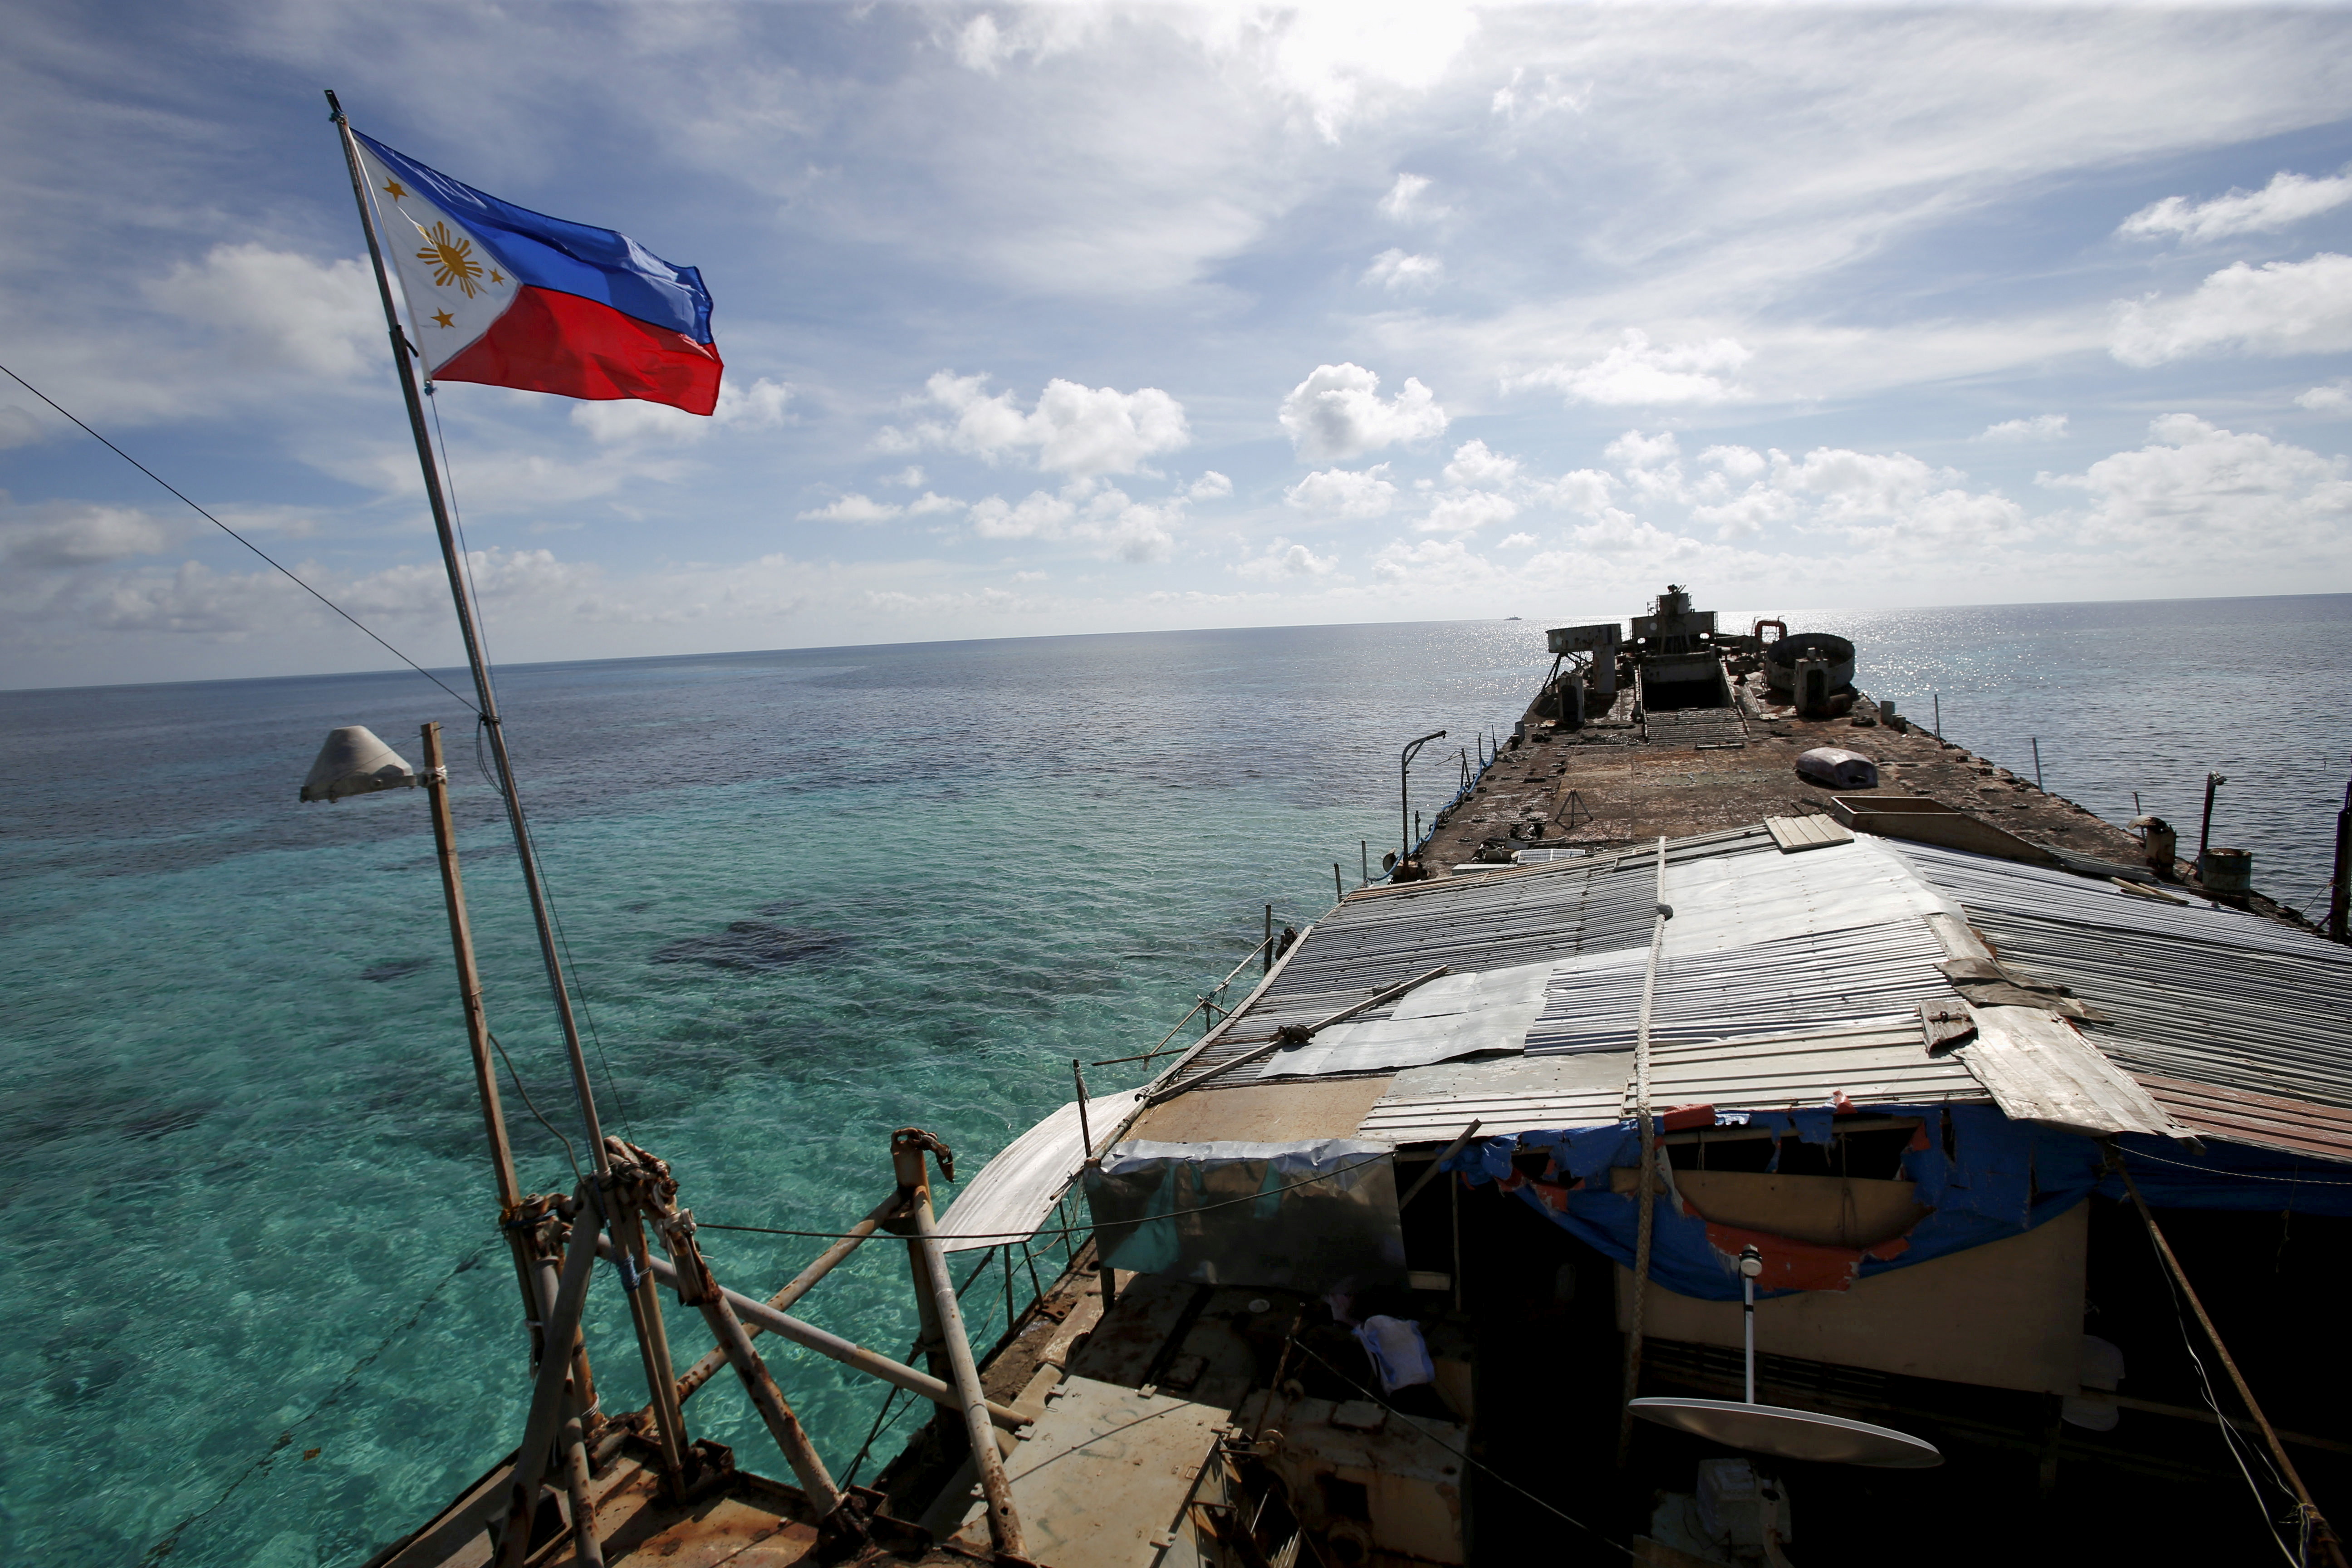 A Philippine flag flutters from BRP Sierra Madre, a dilapidated Philippine Navy ship that has been aground since 1999 and became a Philippine military detachment on the disputed Second Thomas Shoal